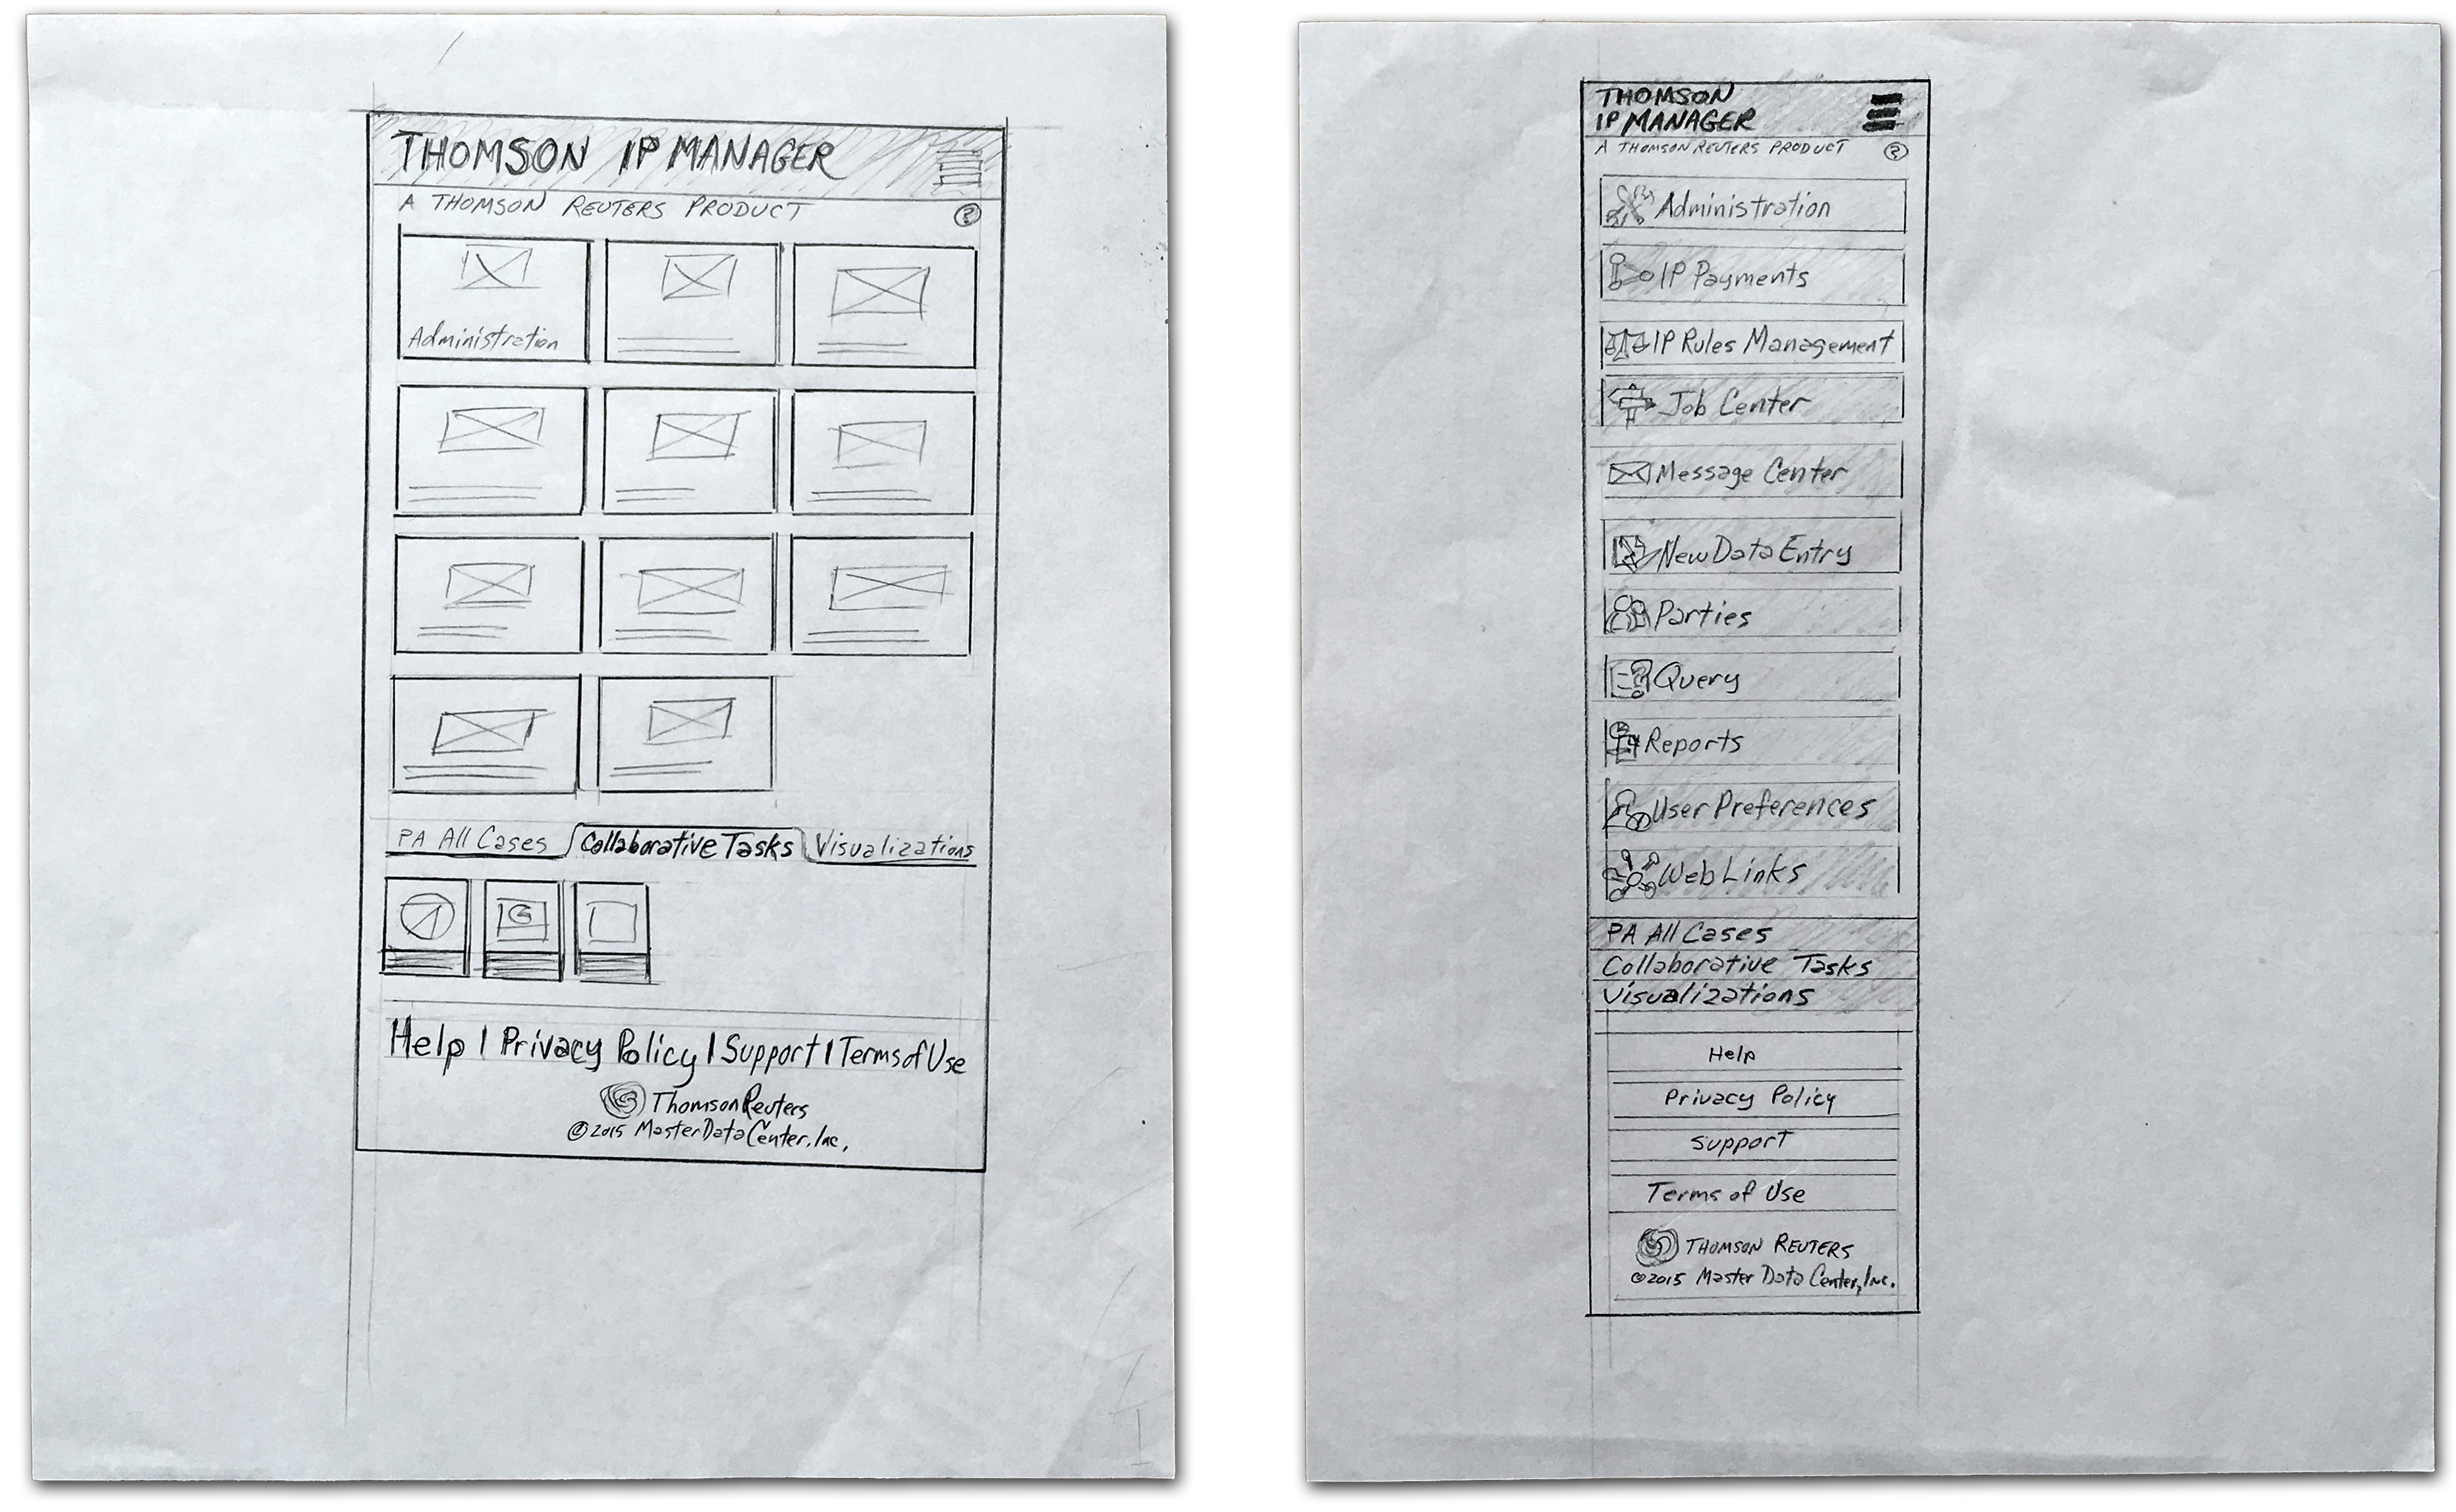 TIPM Responsive Wireframes